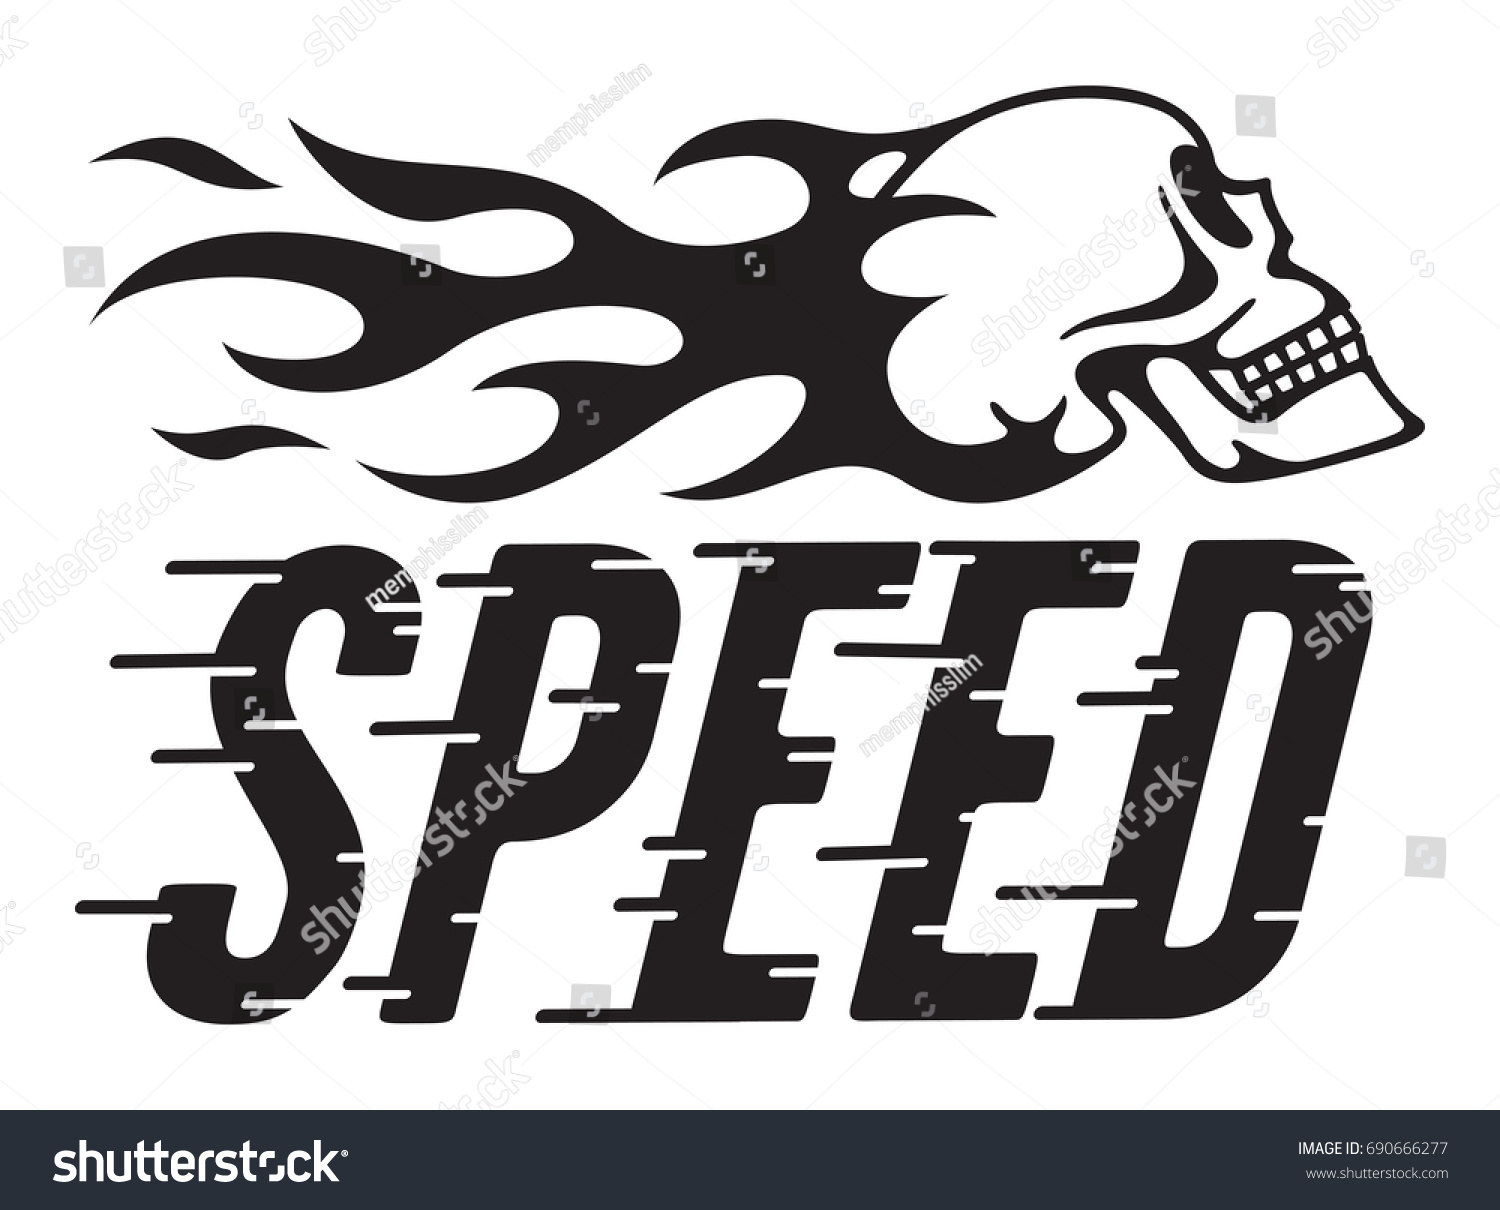 SVG of Speed Retro Vector Design with speed lines and flaming skull
Vector illustration of vintage hot rod, motorcycle, car graphic with custom speed line typography and side view of skull and flames. svg